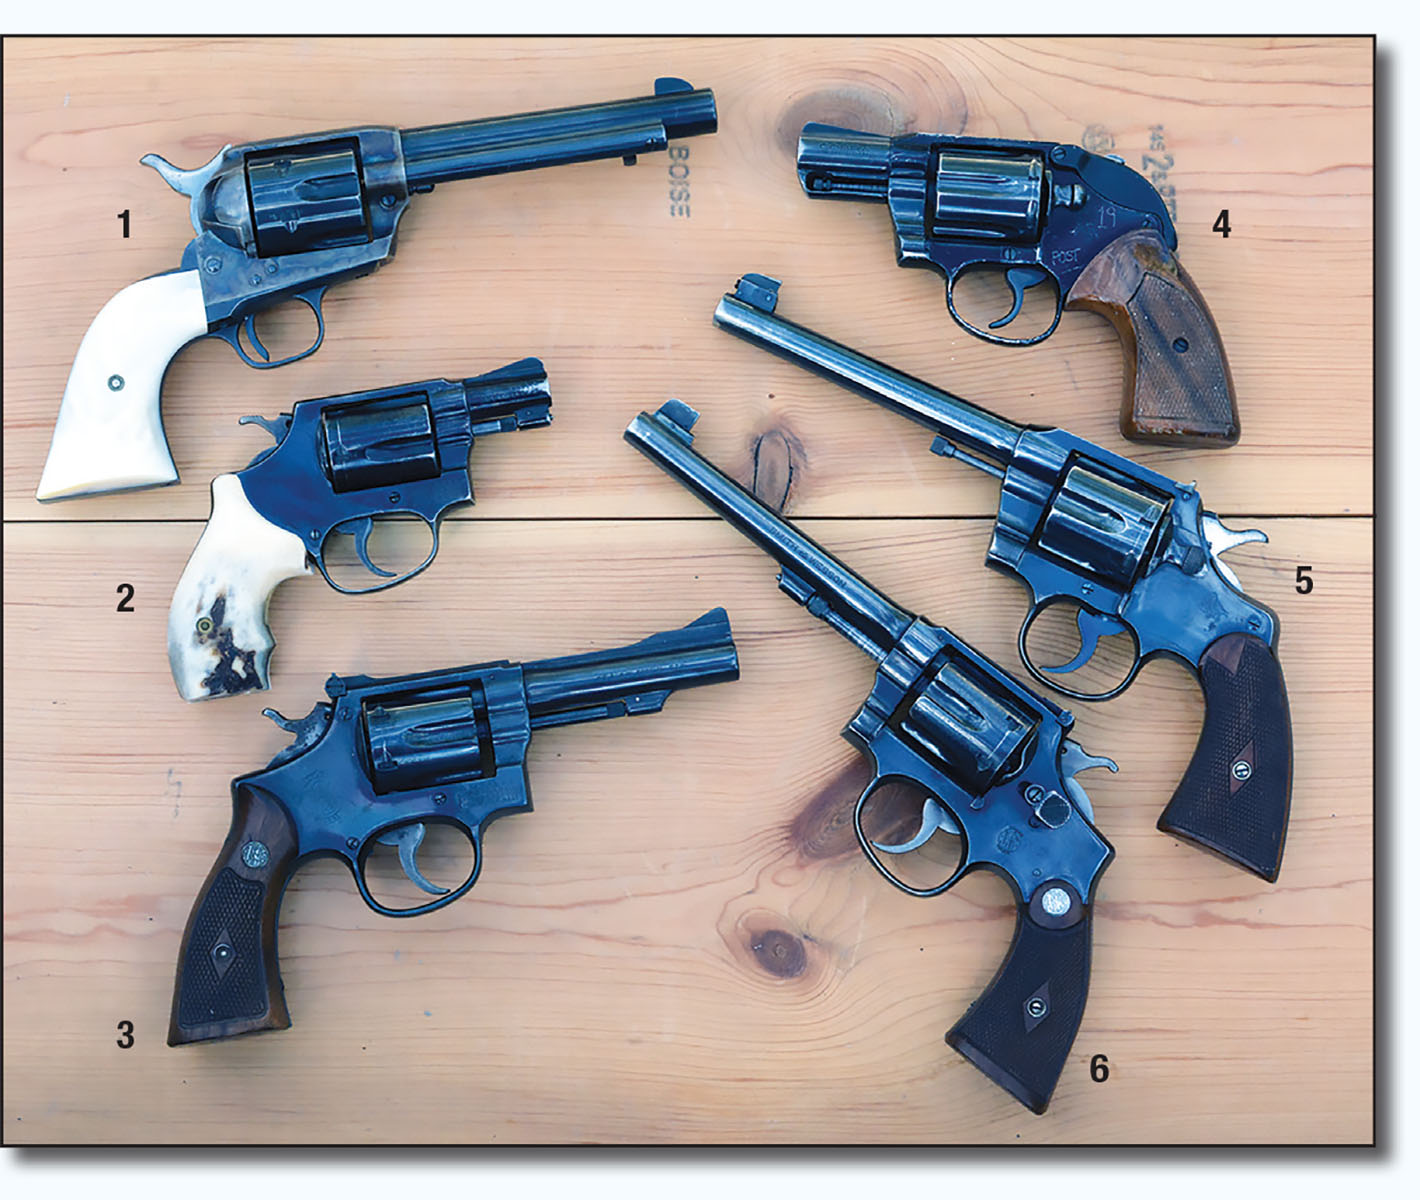 The .38 S&W Special is the most popular centerfire revolver cartridge and has been chambered in a huge variety of guns, many of which are only suitable for standard pressure loads: (1) Colt Single Action Army rare pre-war/post-war variant, (2) Smith & Wesson Chiefs Special, (3) Smith & Wesson K-38 Combat Masterpiece, (4) Colt Cobra, (5) Colt Officers Model (second issue) and (6) Smith & Wesson Military & Police Model of 1905 Target Model .38 (today’s test gun).